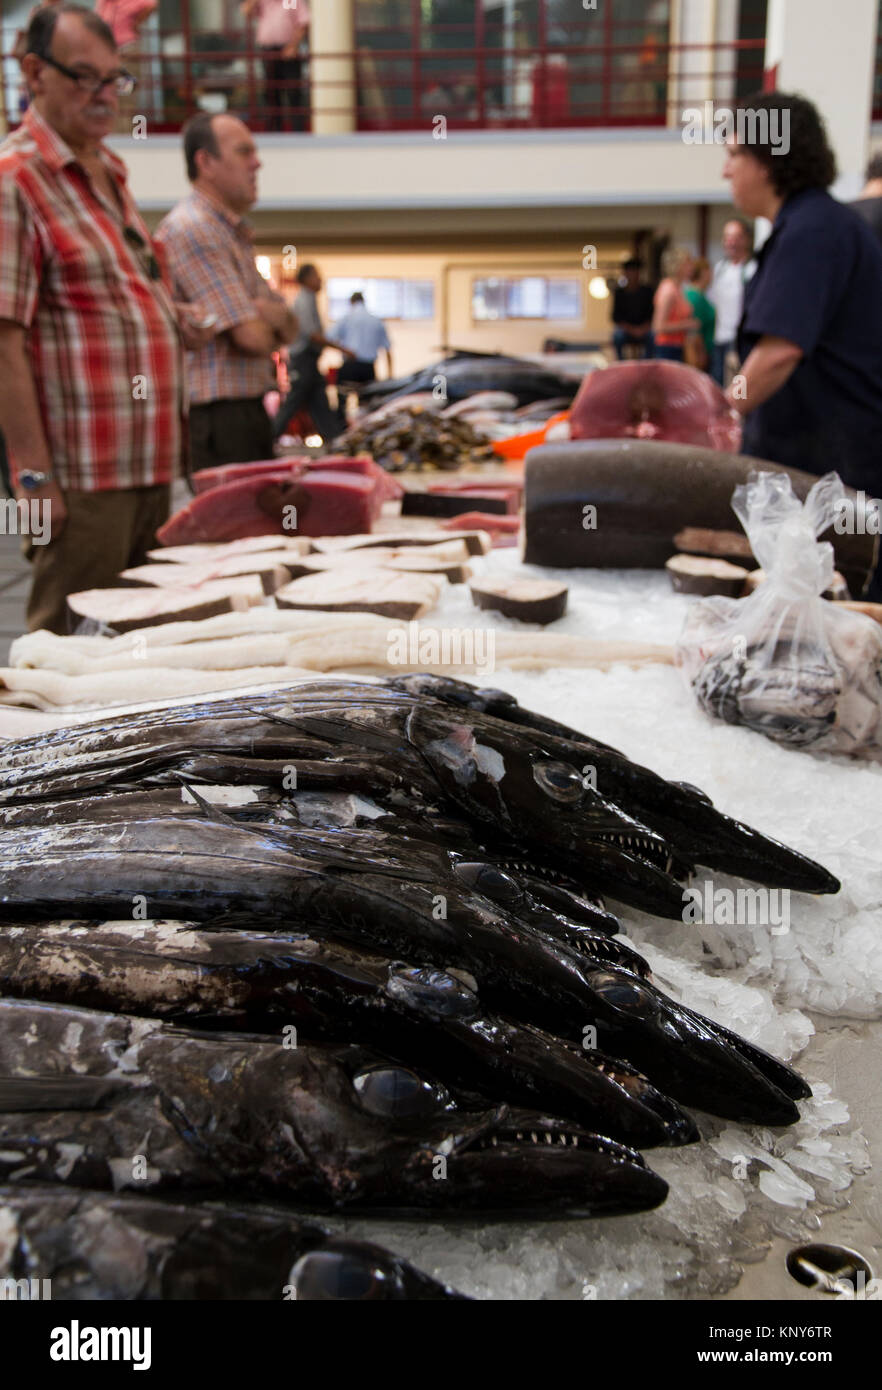 Vendors and buyers trading fish inside the farmers market of Funchal Madeira with close-up view of espada fish Stock Photo